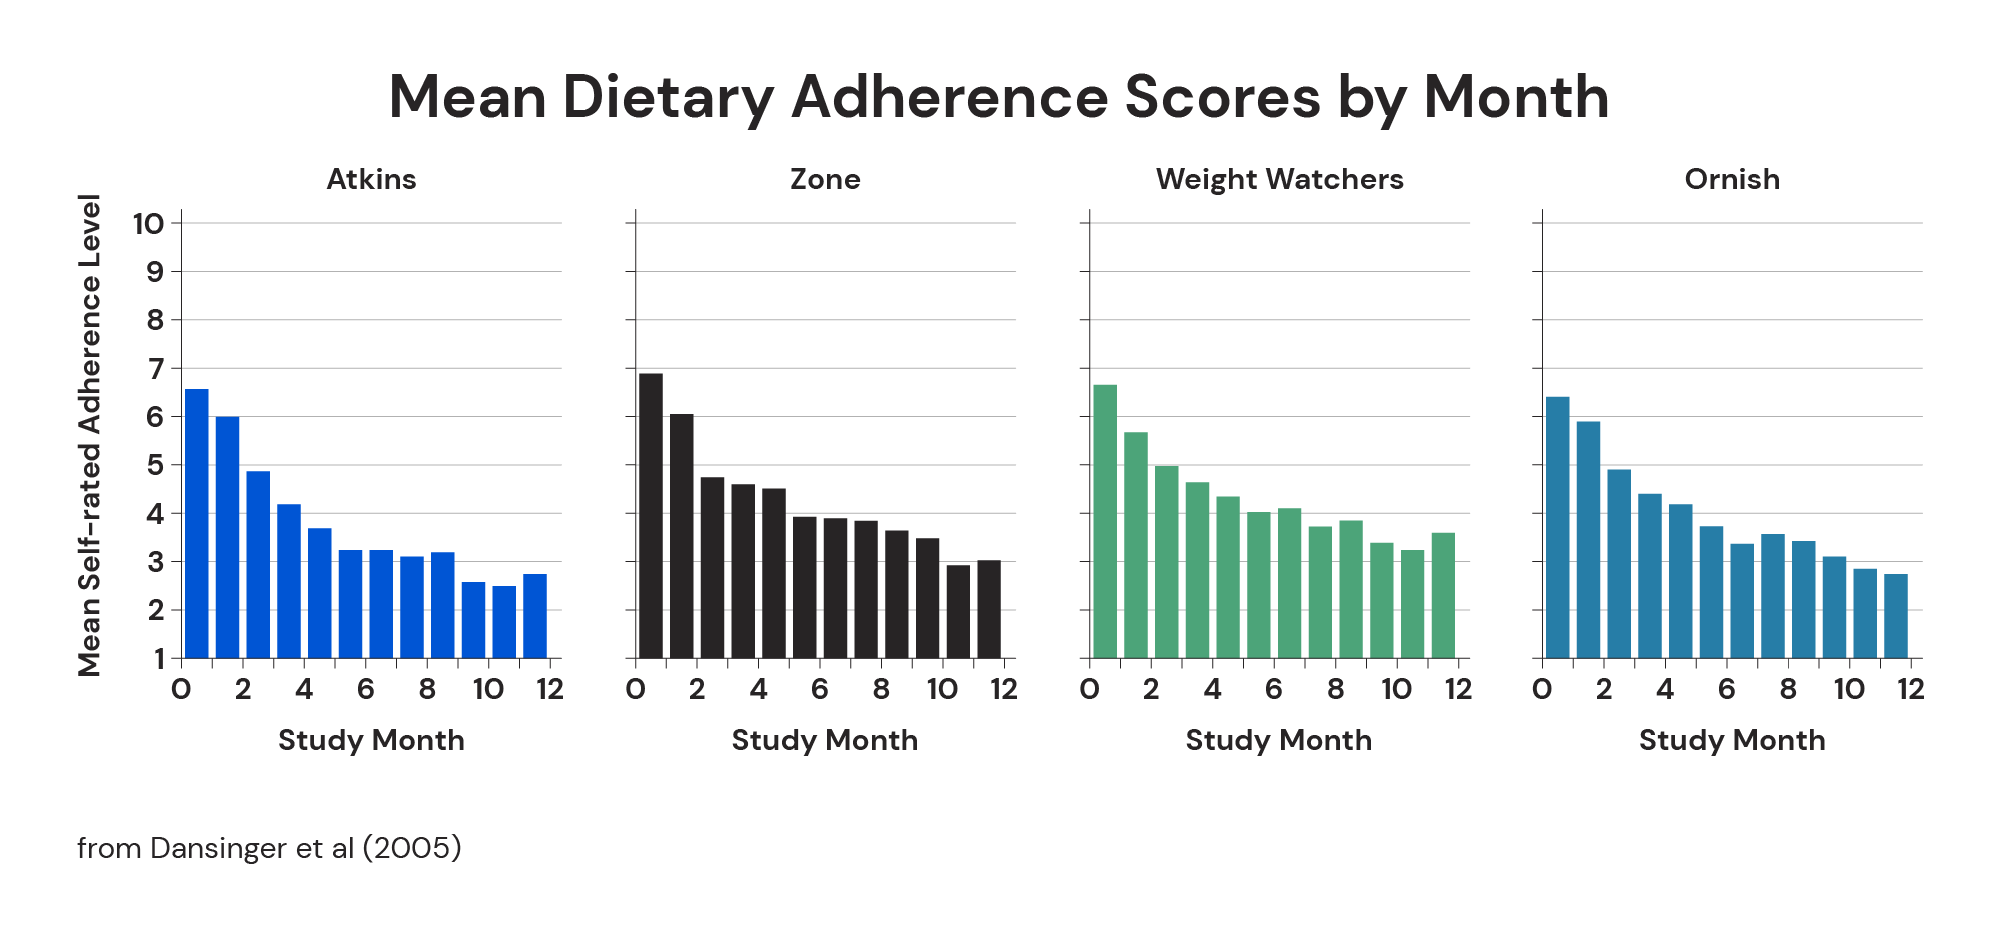 Mean dietary adherence scores by month from Dansinger et al